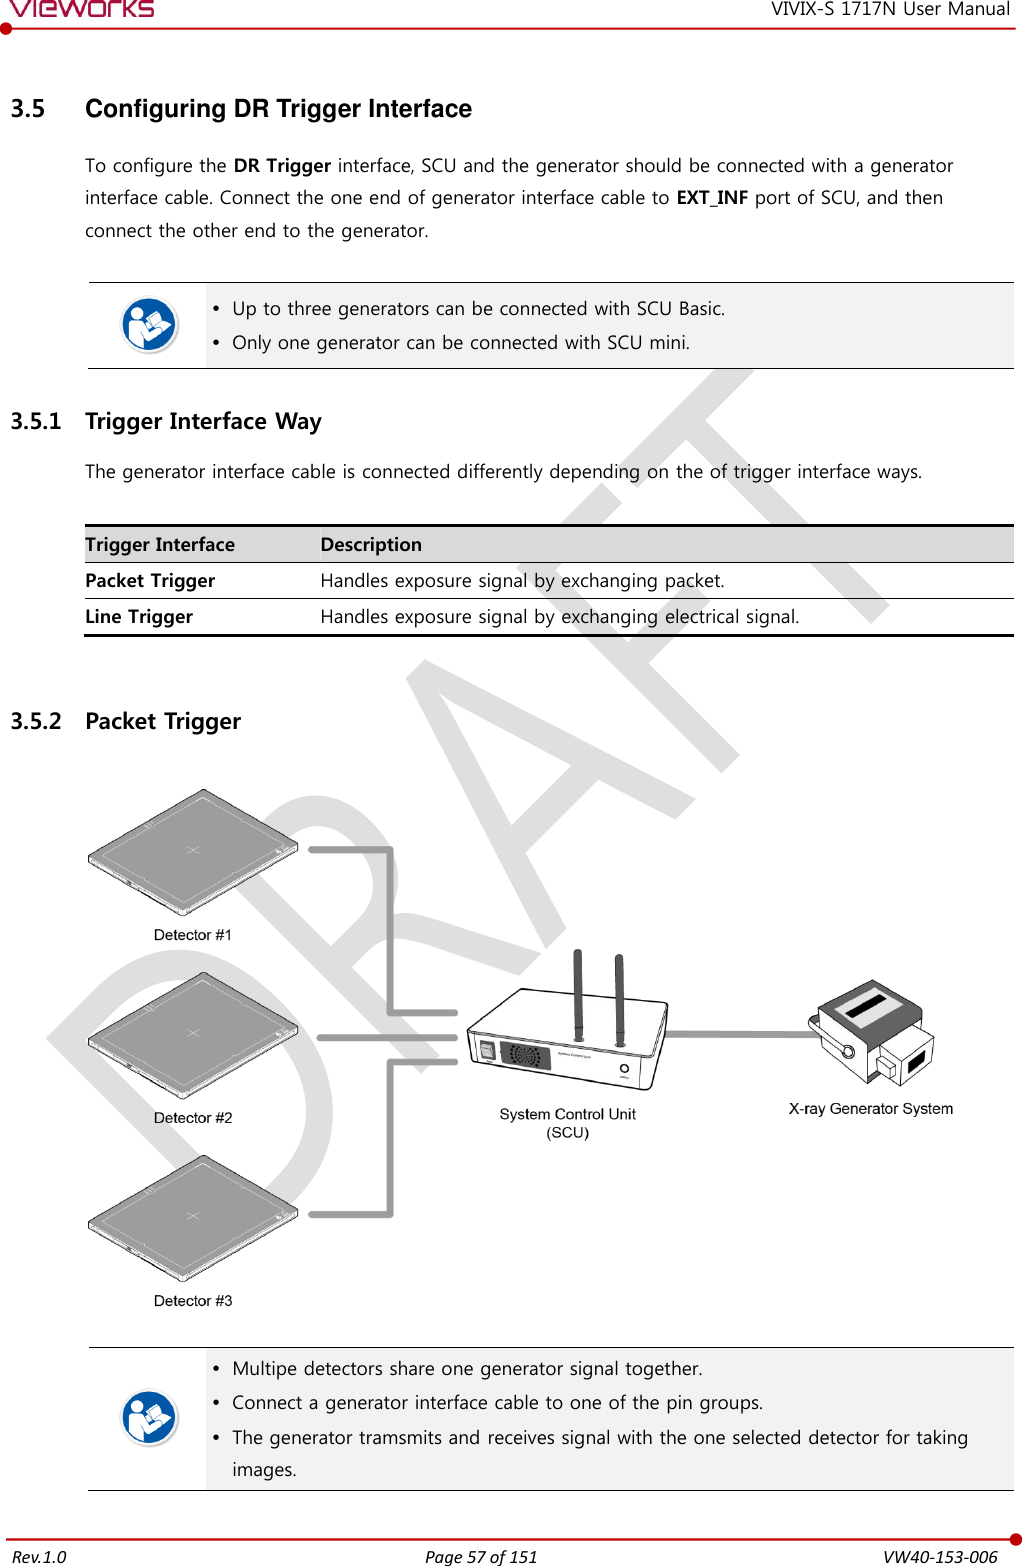   Rev.1.0 Page 57 of 151  VW40-153-006 VIVIX-S 1717N User Manual 3.5  Configuring DR Trigger Interface To configure the DR Trigger interface, SCU and the generator should be connected with a generator interface cable. Connect the one end of generator interface cable to EXT_INF port of SCU, and then connect the other end to the generator.    Up to three generators can be connected with SCU Basic.  Only one generator can be connected with SCU mini. 3.5.1 Trigger Interface Way The generator interface cable is connected differently depending on the of trigger interface ways.  Trigger Interface Description Packet Trigger Handles exposure signal by exchanging packet. Line Trigger Handles exposure signal by exchanging electrical signal.  3.5.2 Packet Trigger      Multipe detectors share one generator signal together.  Connect a generator interface cable to one of the pin groups.  The generator tramsmits and receives signal with the one selected detector for taking images.  